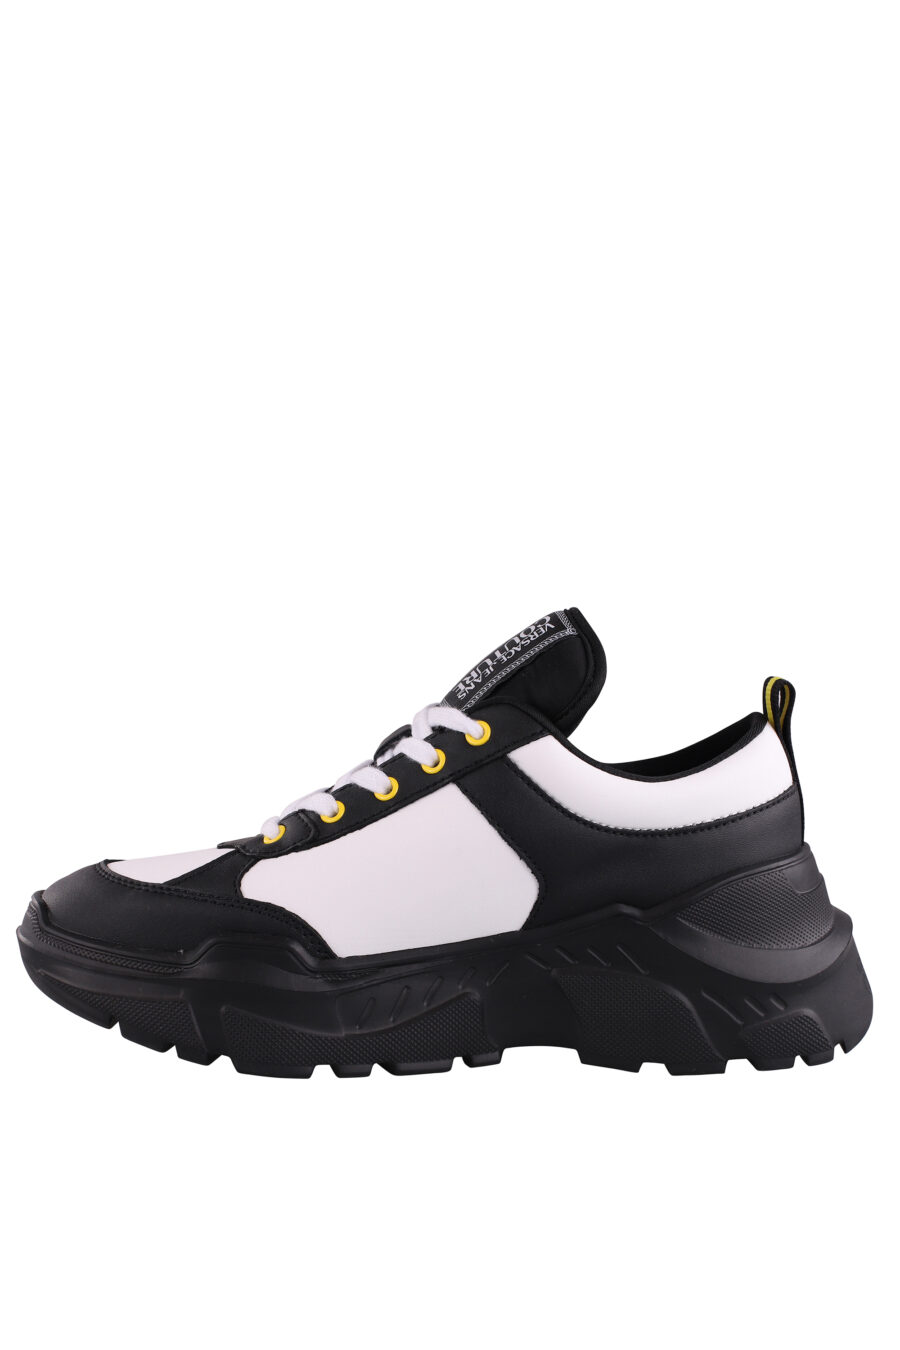 Black and white bicolour trainers with logo and yellow detail - IMG 9071